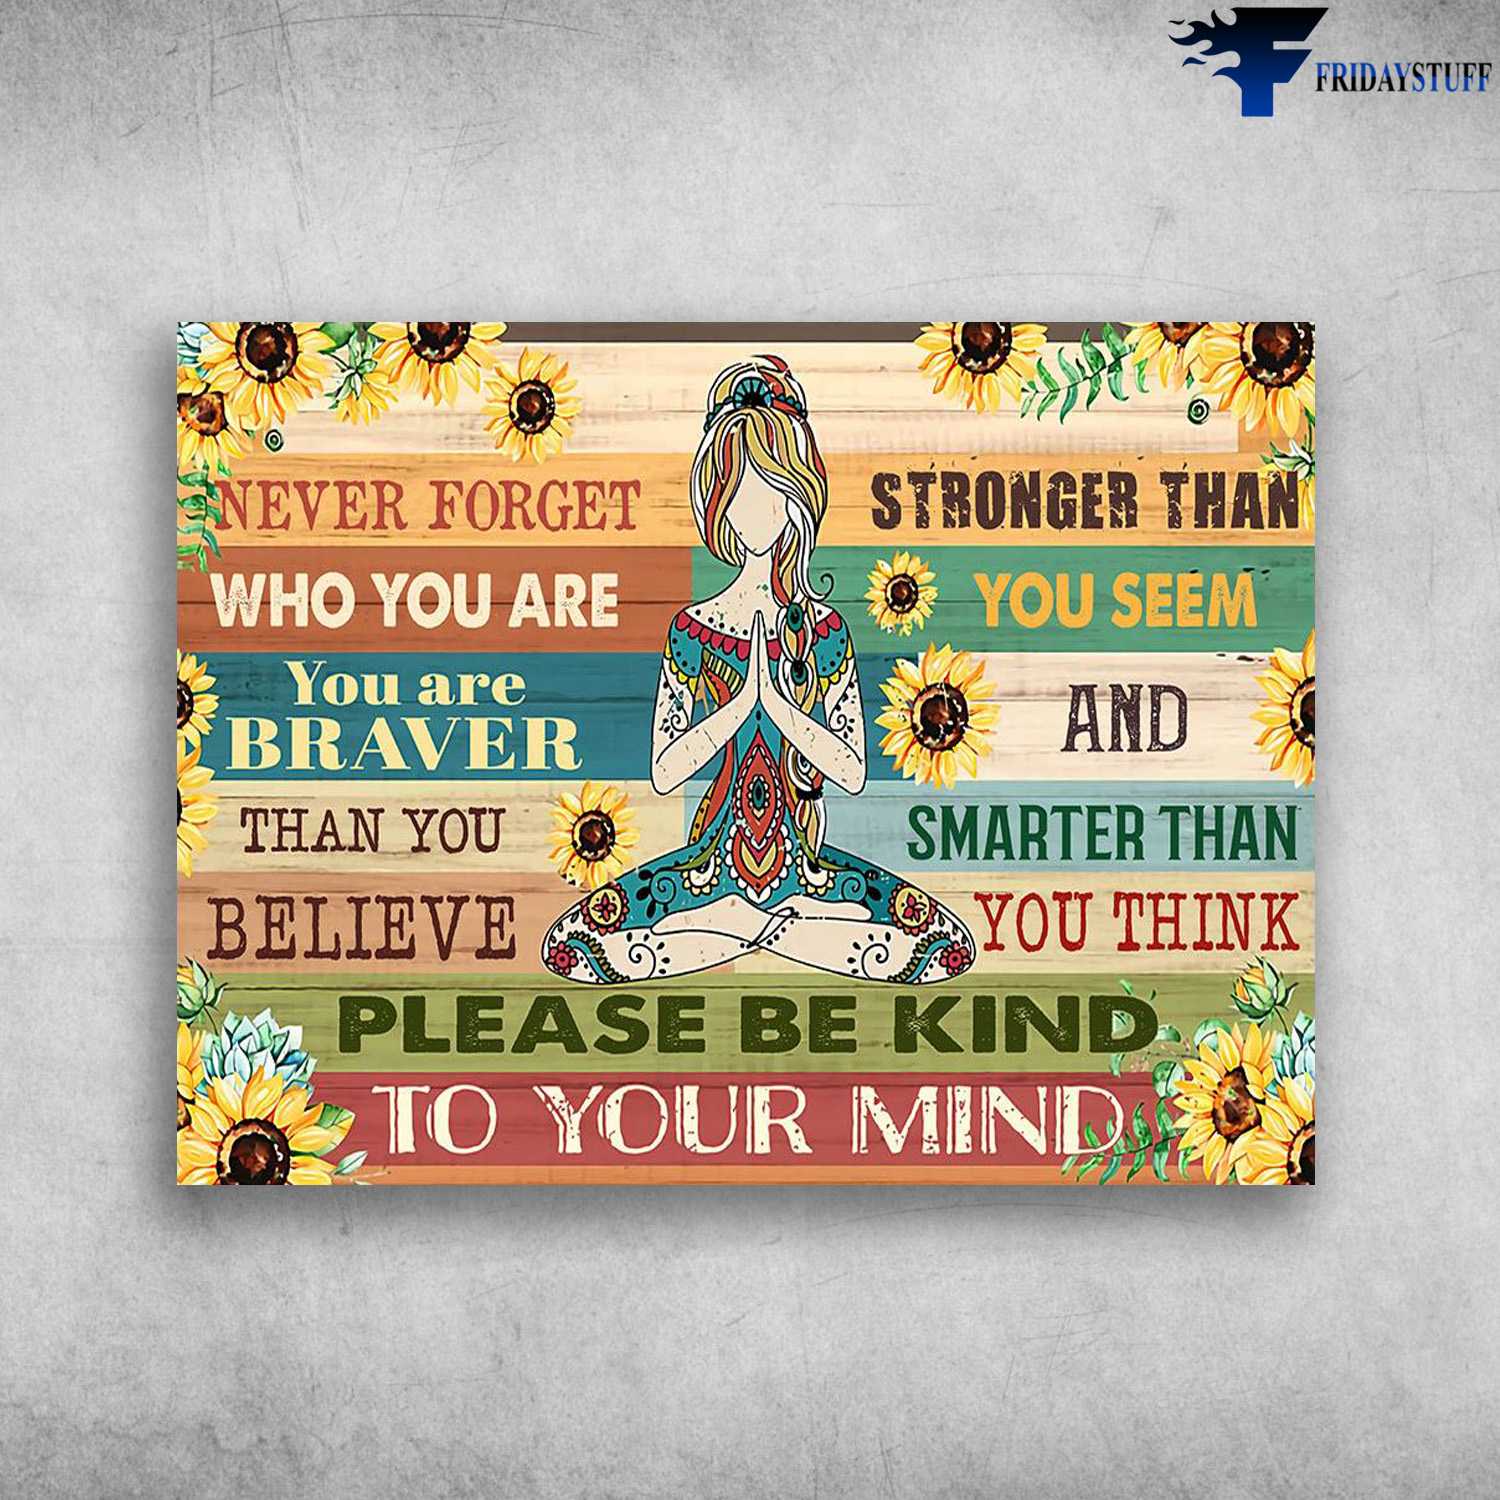 Yoga Poster, Yoga Girl - Never Forget Who You Are, You Are Braver, Than You Believe, Strong Than You Seem, And Smarter Than You Think, Please Be Kind To Your Mind